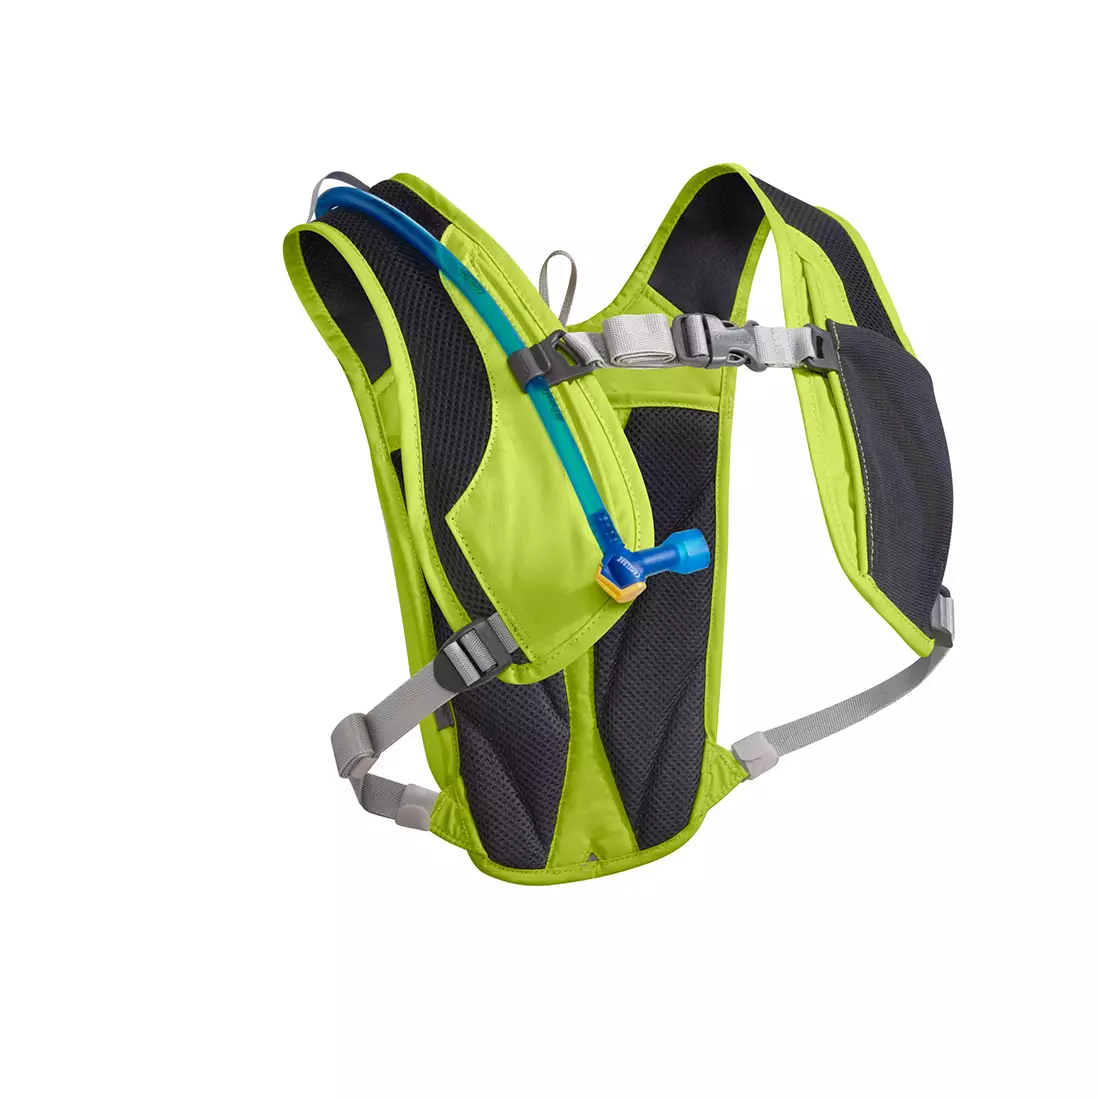 CAMELBAK backpack with water bladder Dart 50 oz / 1.5 L Lime Punch/Charcoal INTL 62355-IN SS16